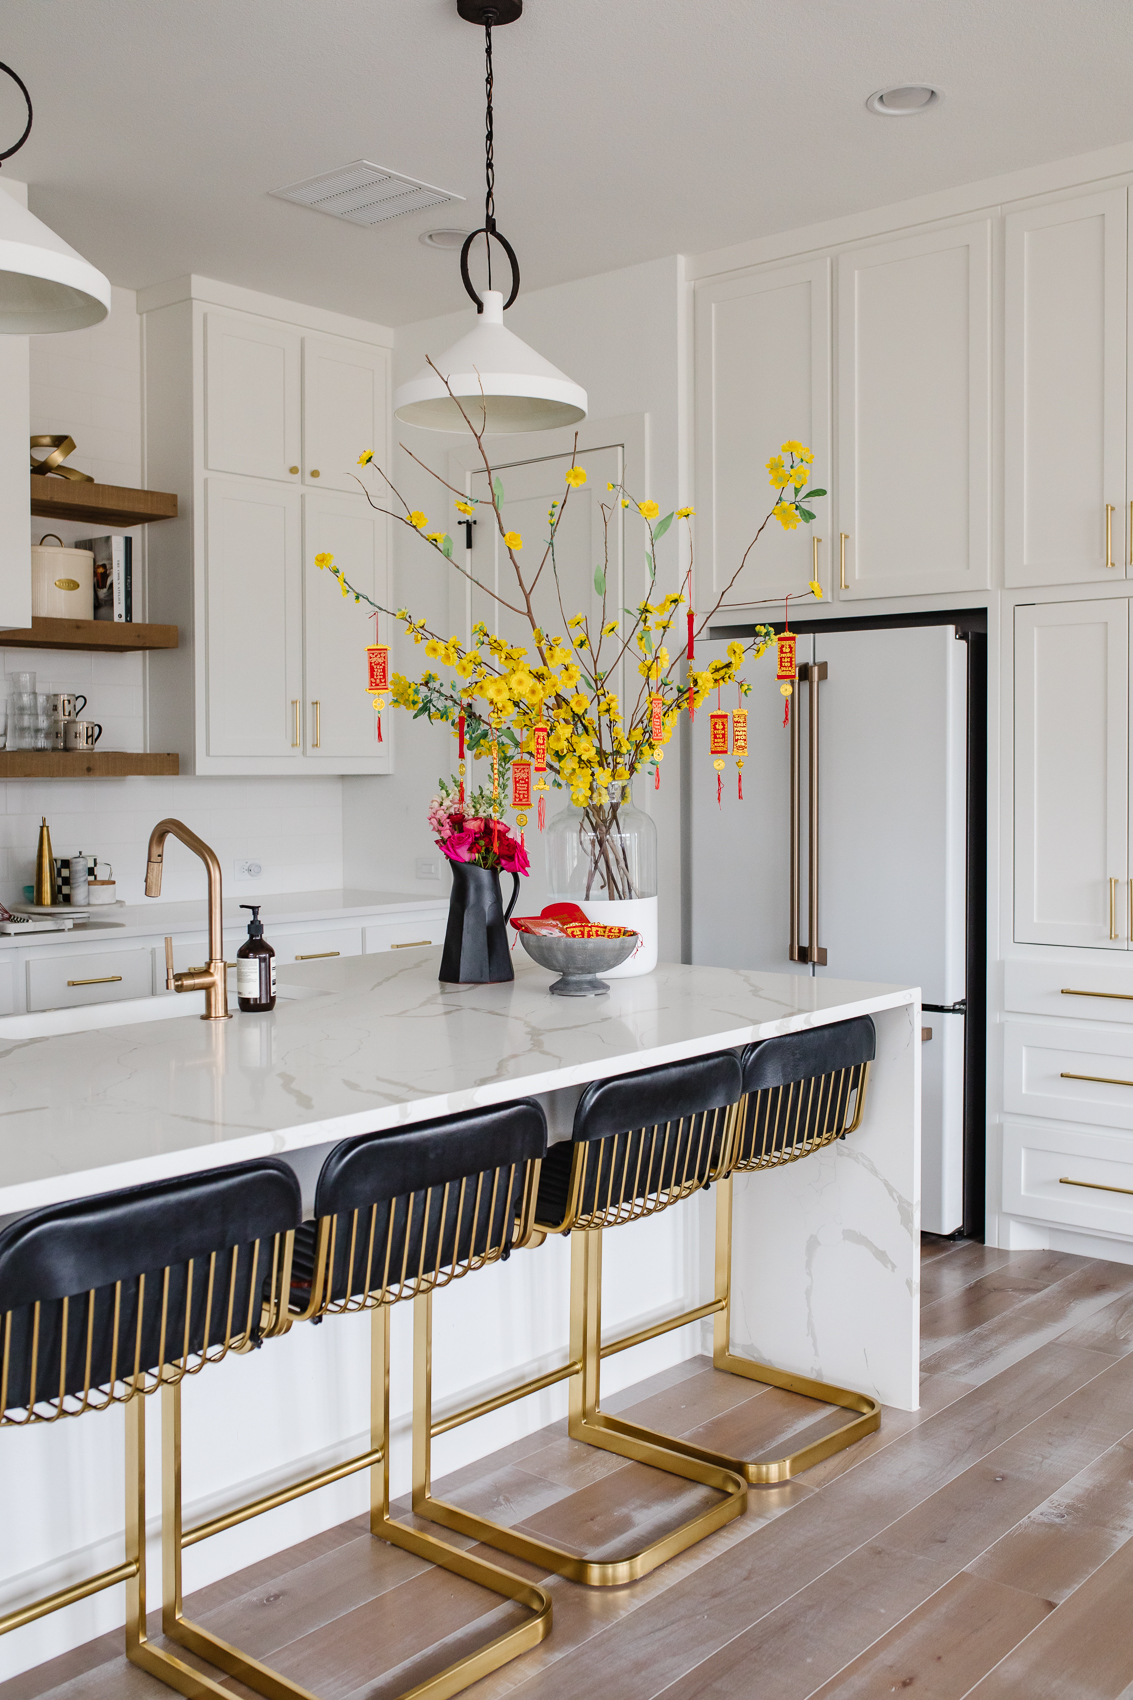 Ochna integerrima or hoa mai branches in a dipped vase with other Lunar New Year or Tet Vietnamese New Year decorations in a white kitchen in a transitional home